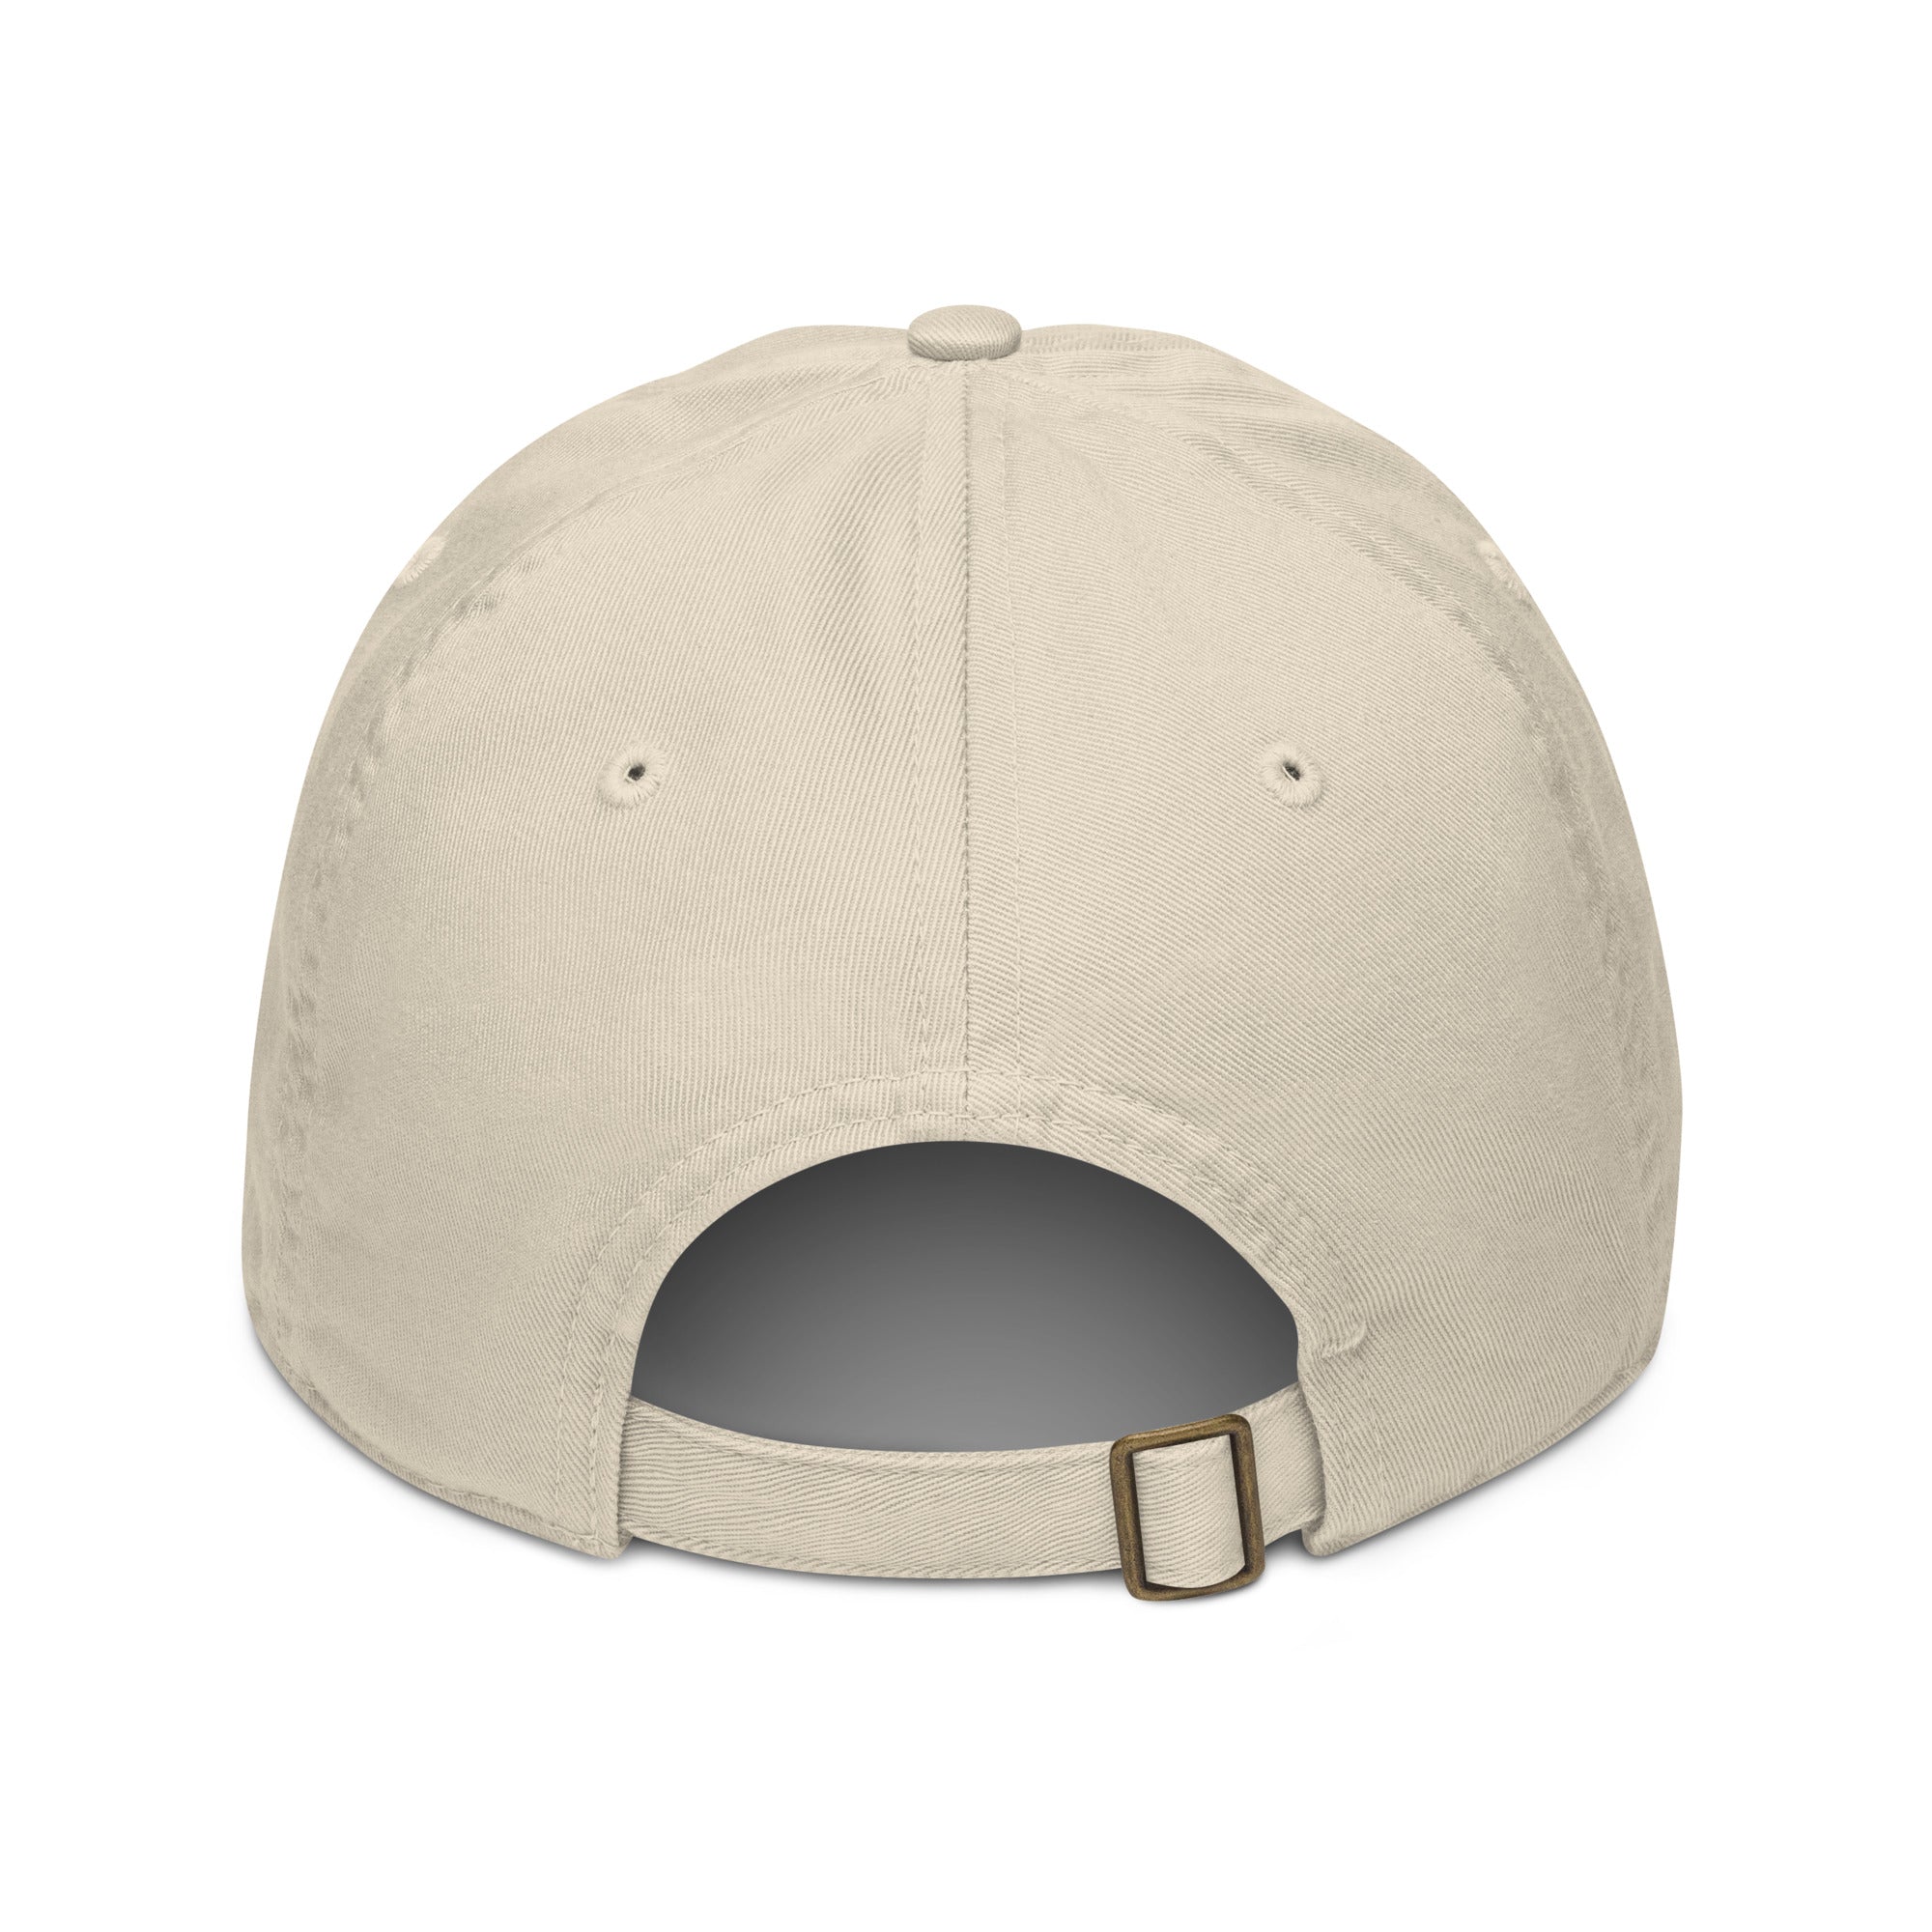 The back of a tan hat on a white background